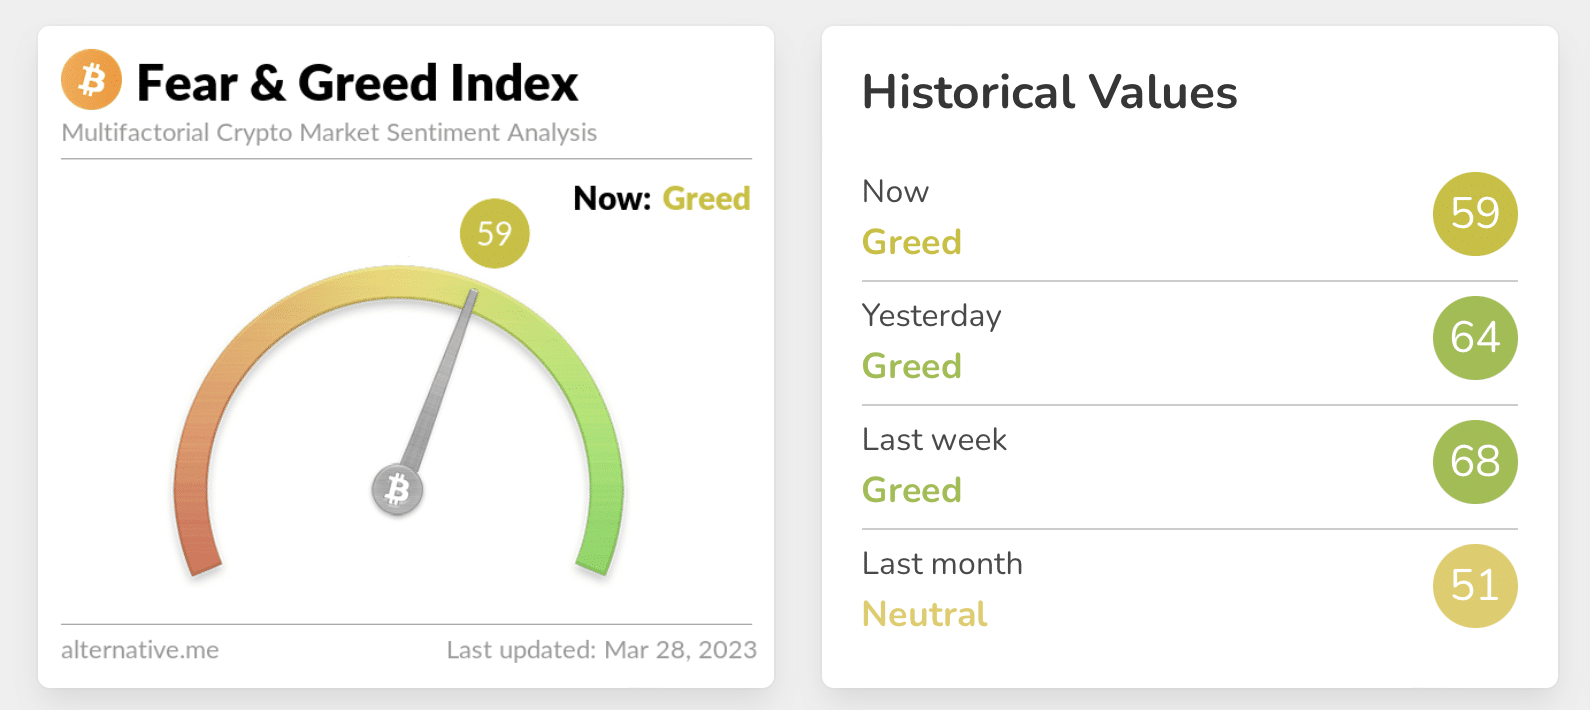 Bitcoin Fear and Greed Index - What Does the Bitcoin Number Mean?